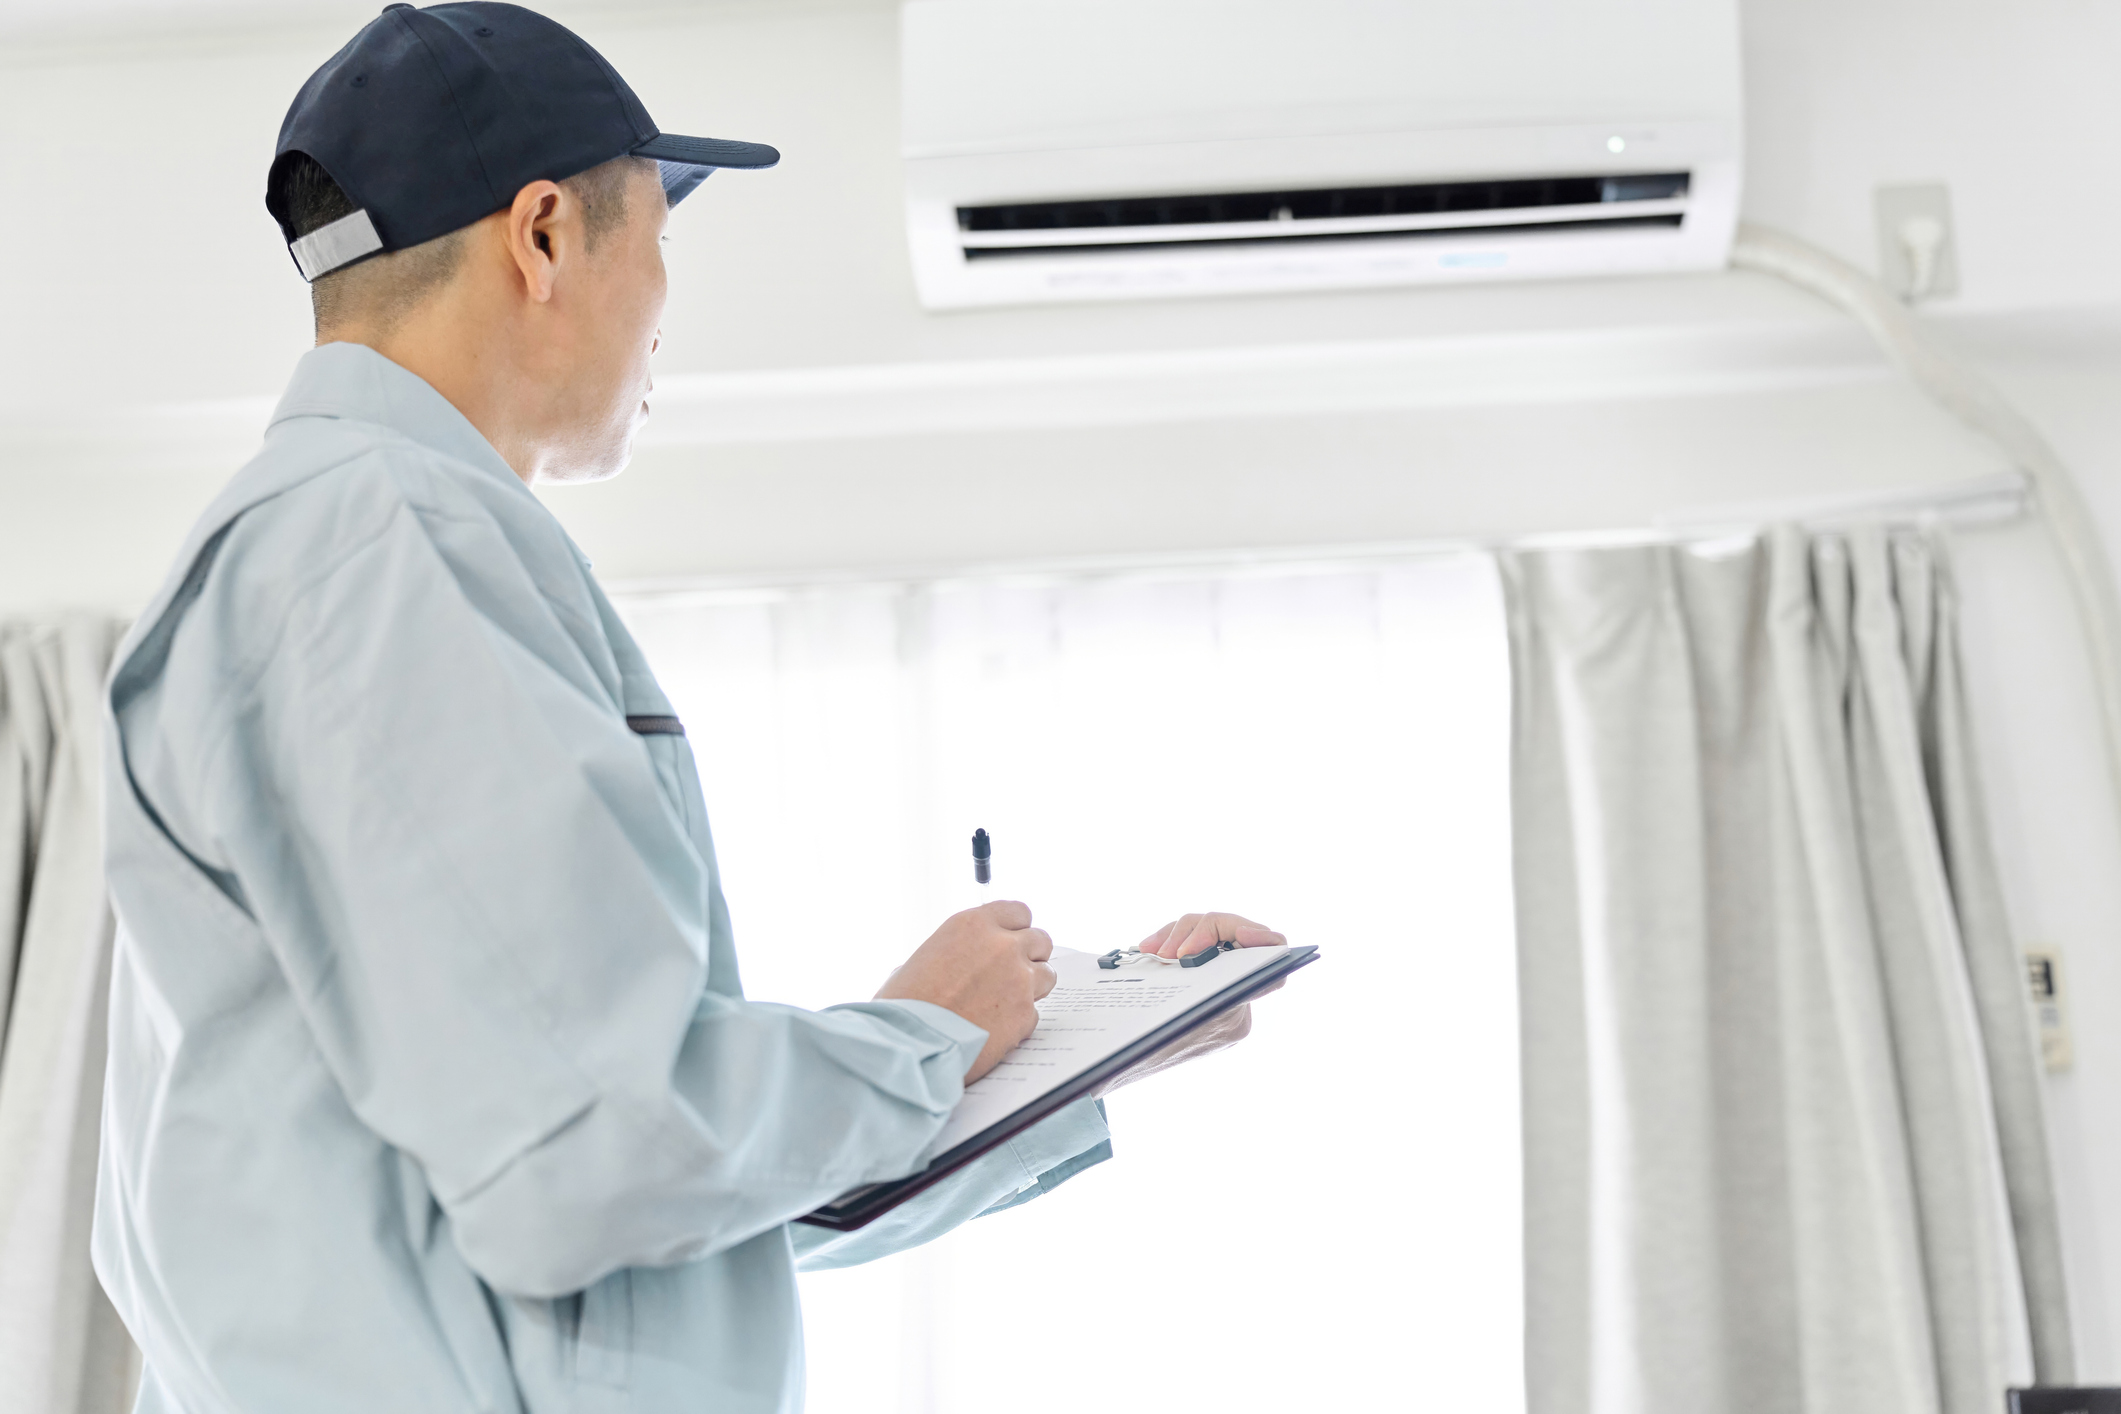 How to Prepare Your Home for Air Conditioner Replacement